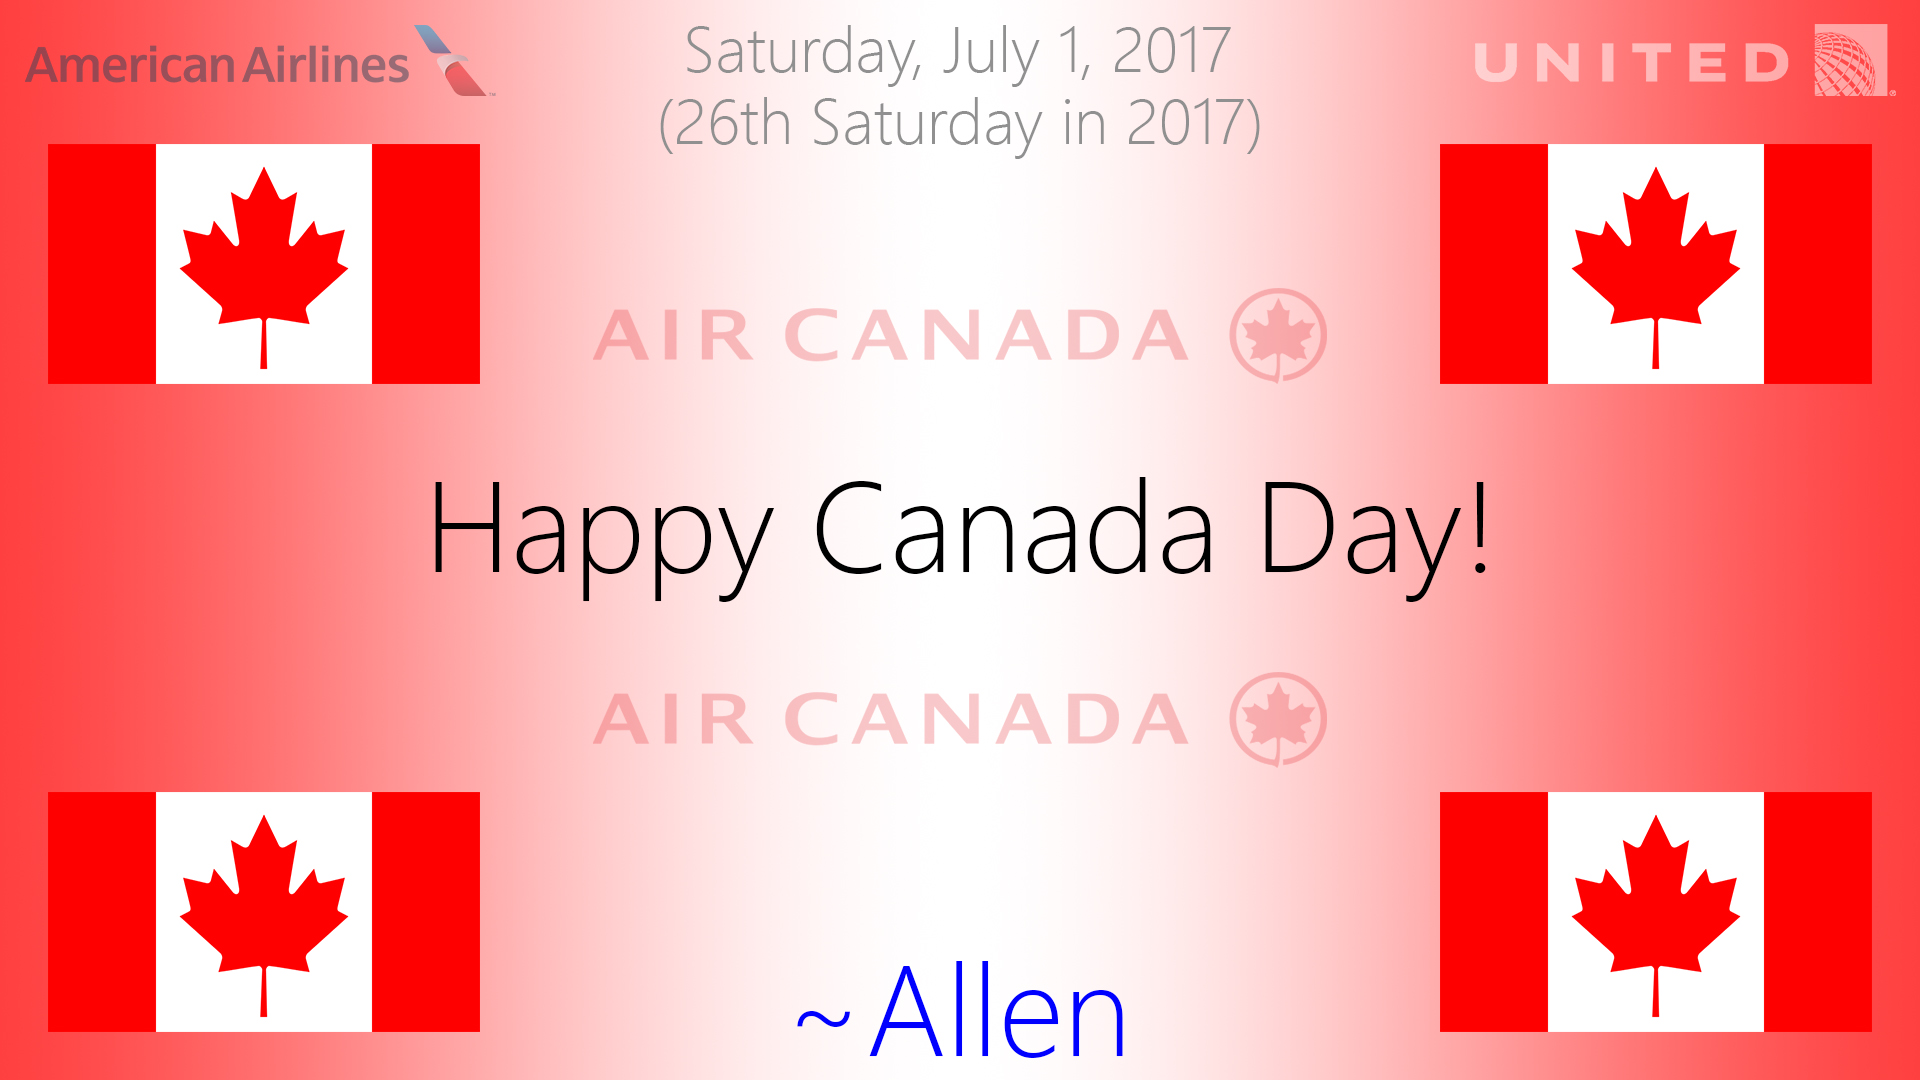 sat_7_1_2017___happy_canada_day__by_alle